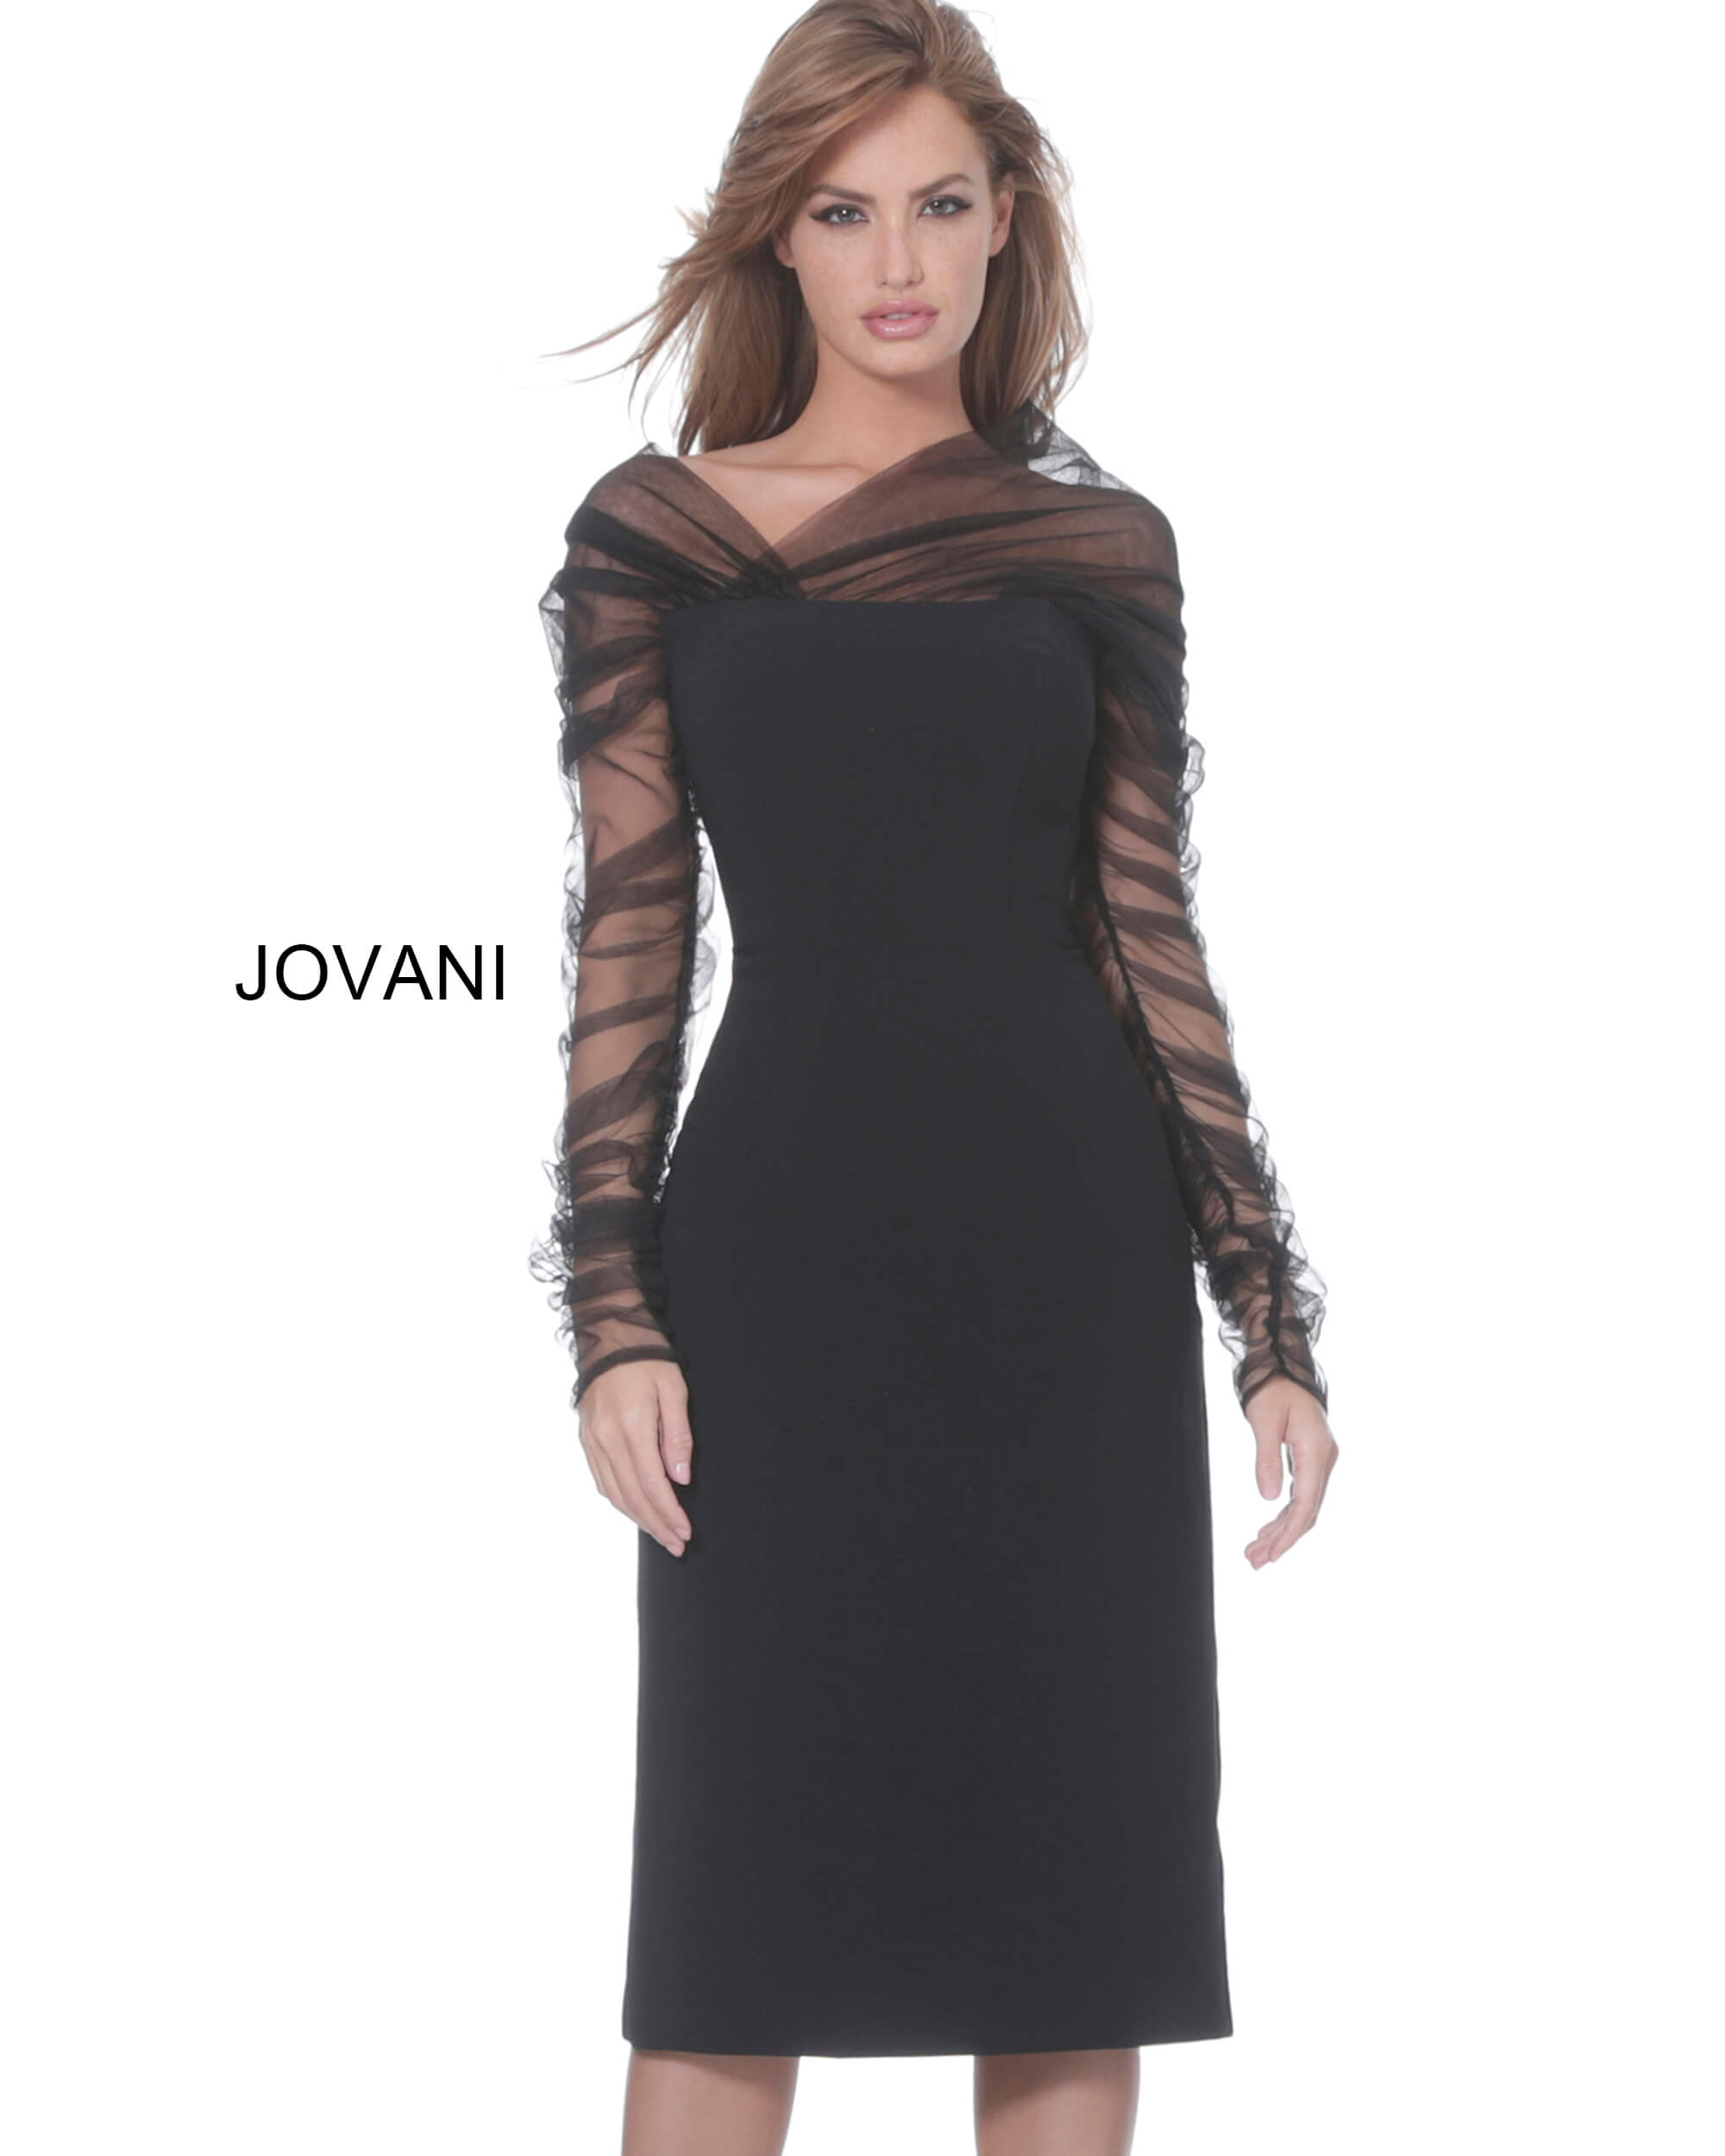 Buy > short black cocktail dress with long sleeves > in stock